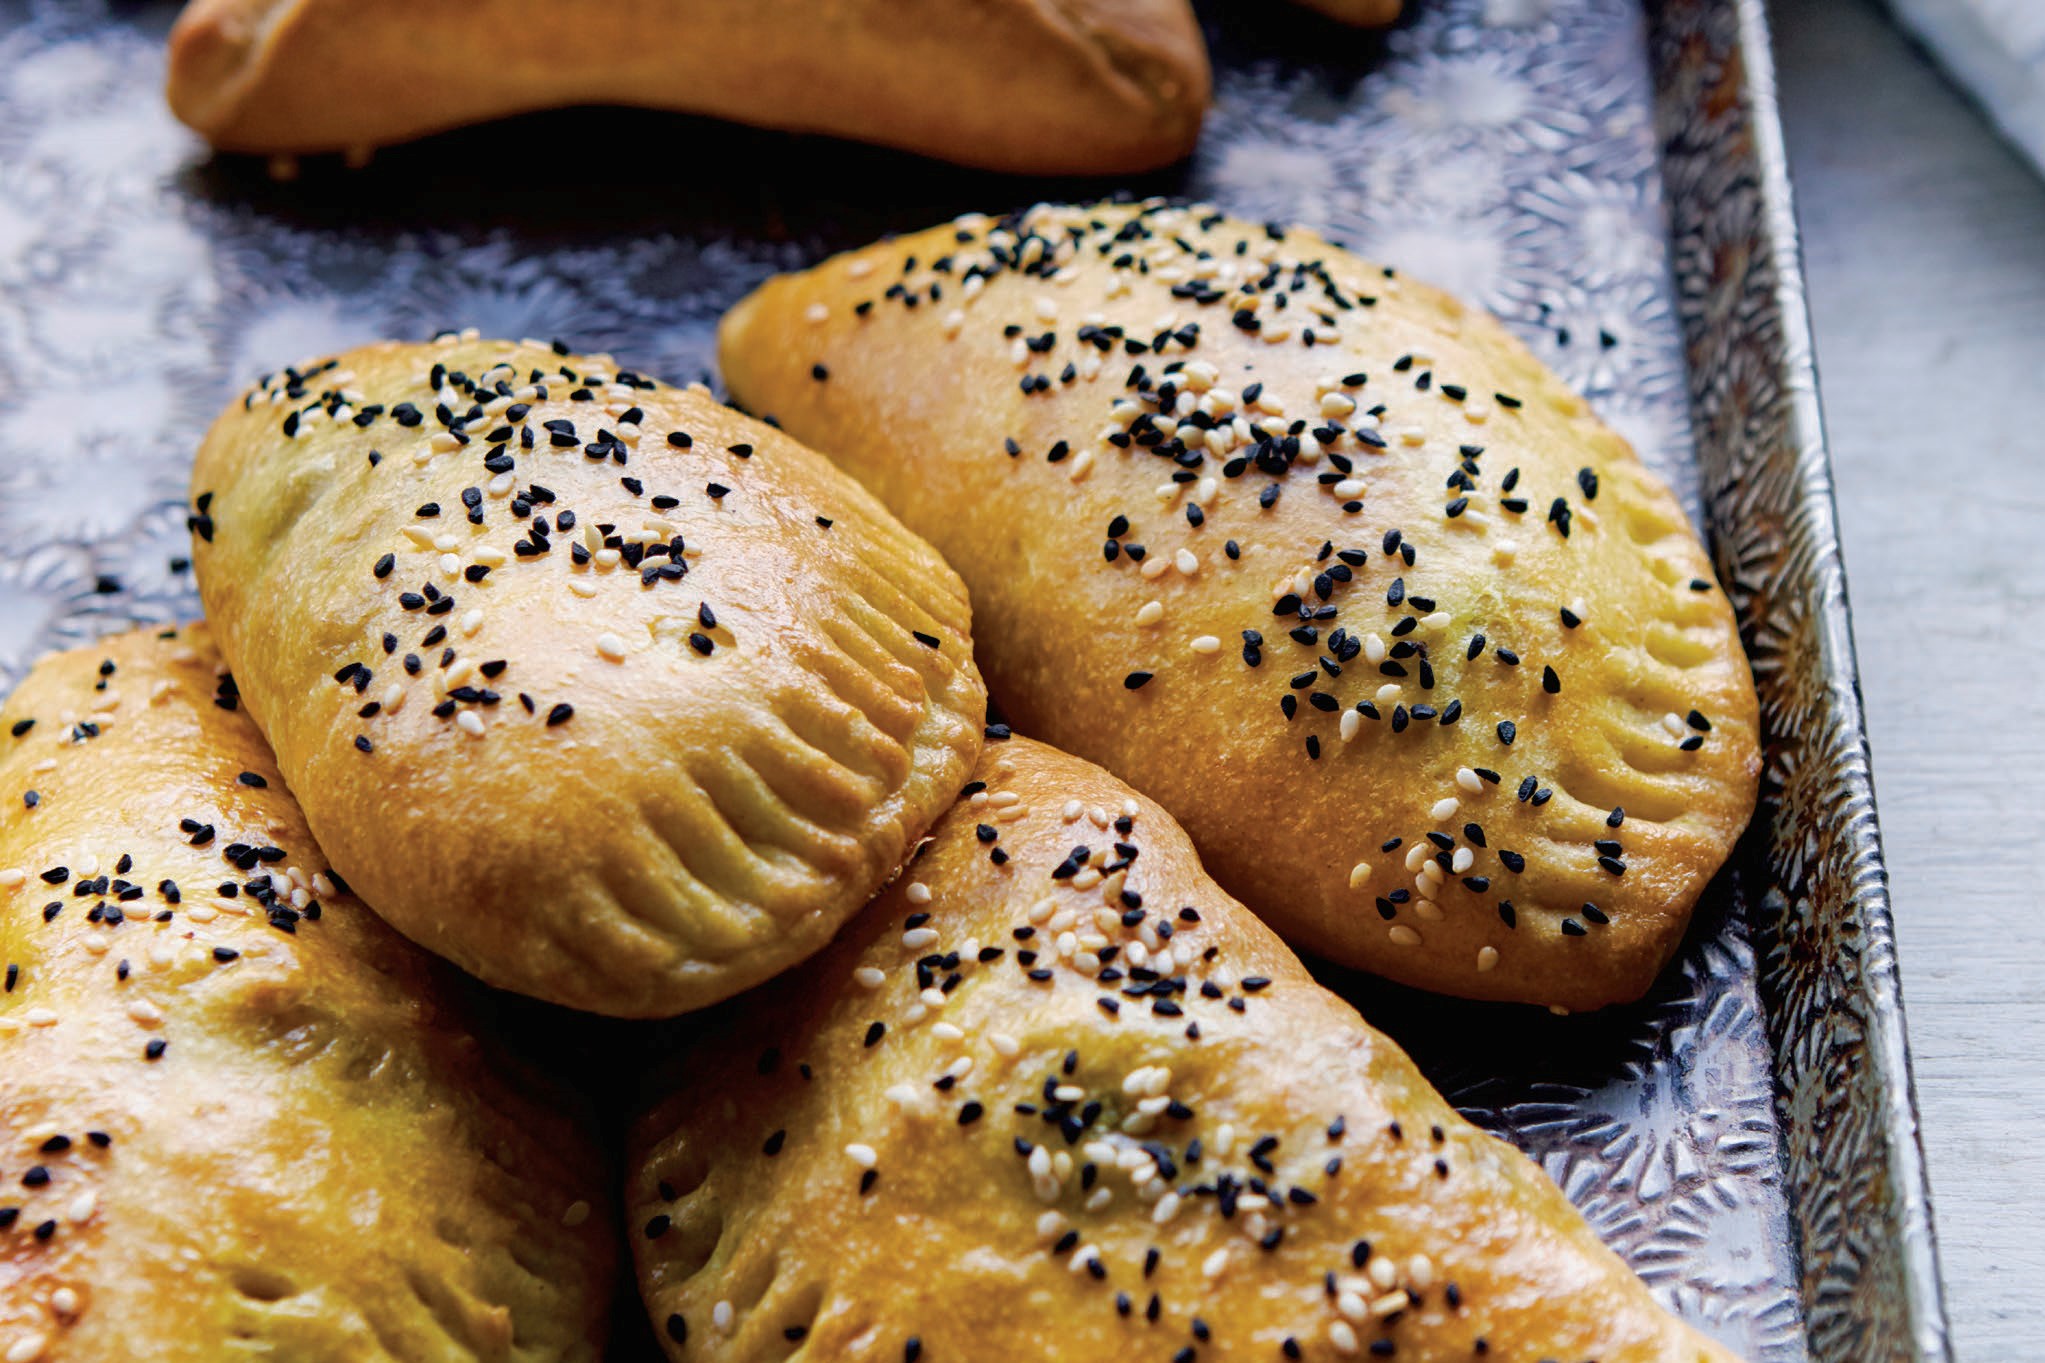 Sambousek, savory pastries topped with nigella and sesame seeds